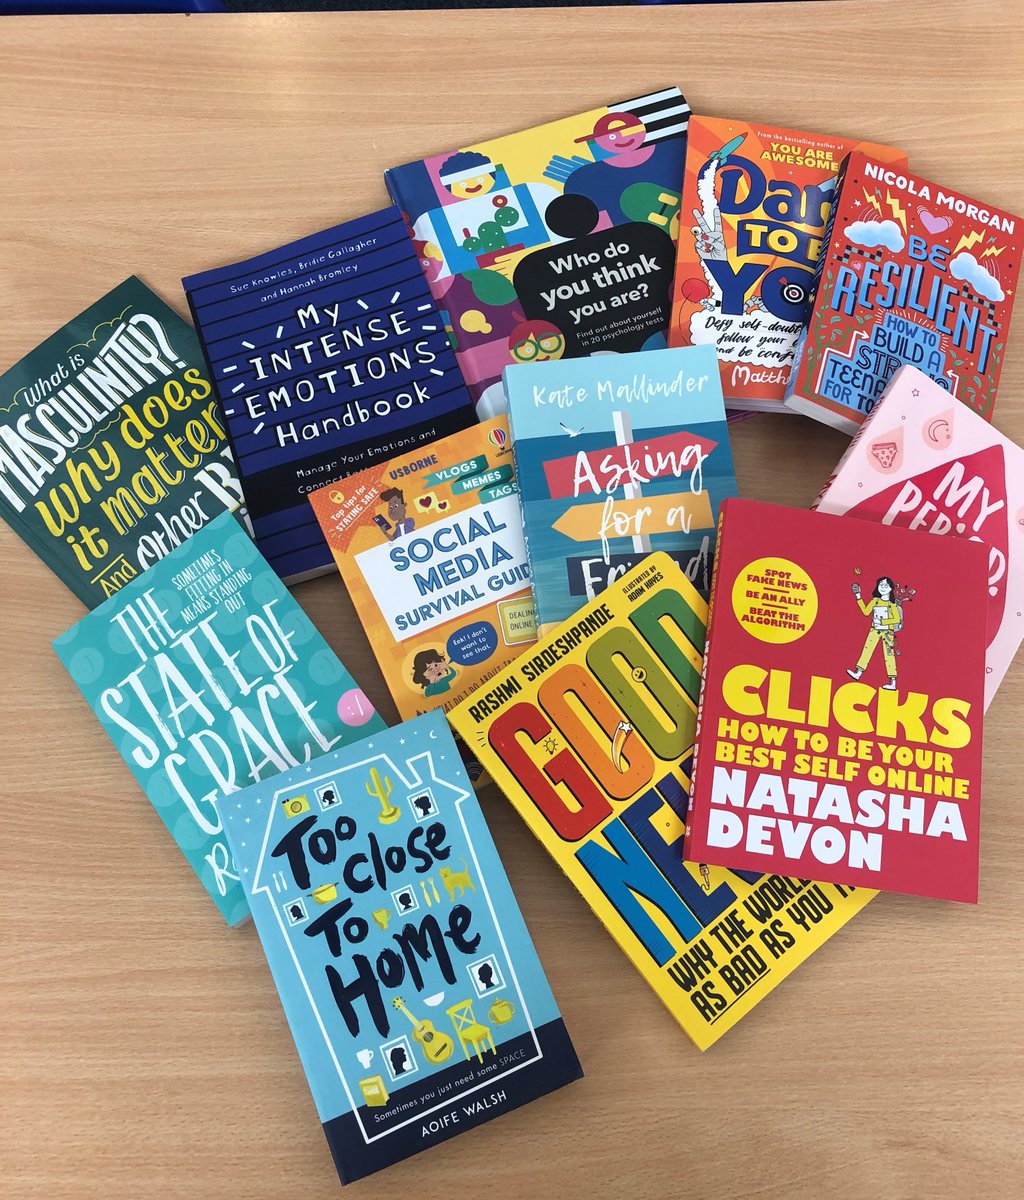 Thank you to Miss Roach & the Thrive team, who have enabled us to add more Mental Health & Wellbeing books to the library. We have also purchased some notebooks with inspirational front covers which will be available to students in the Safe Space #TheCTAWay #mentalhealthbooks